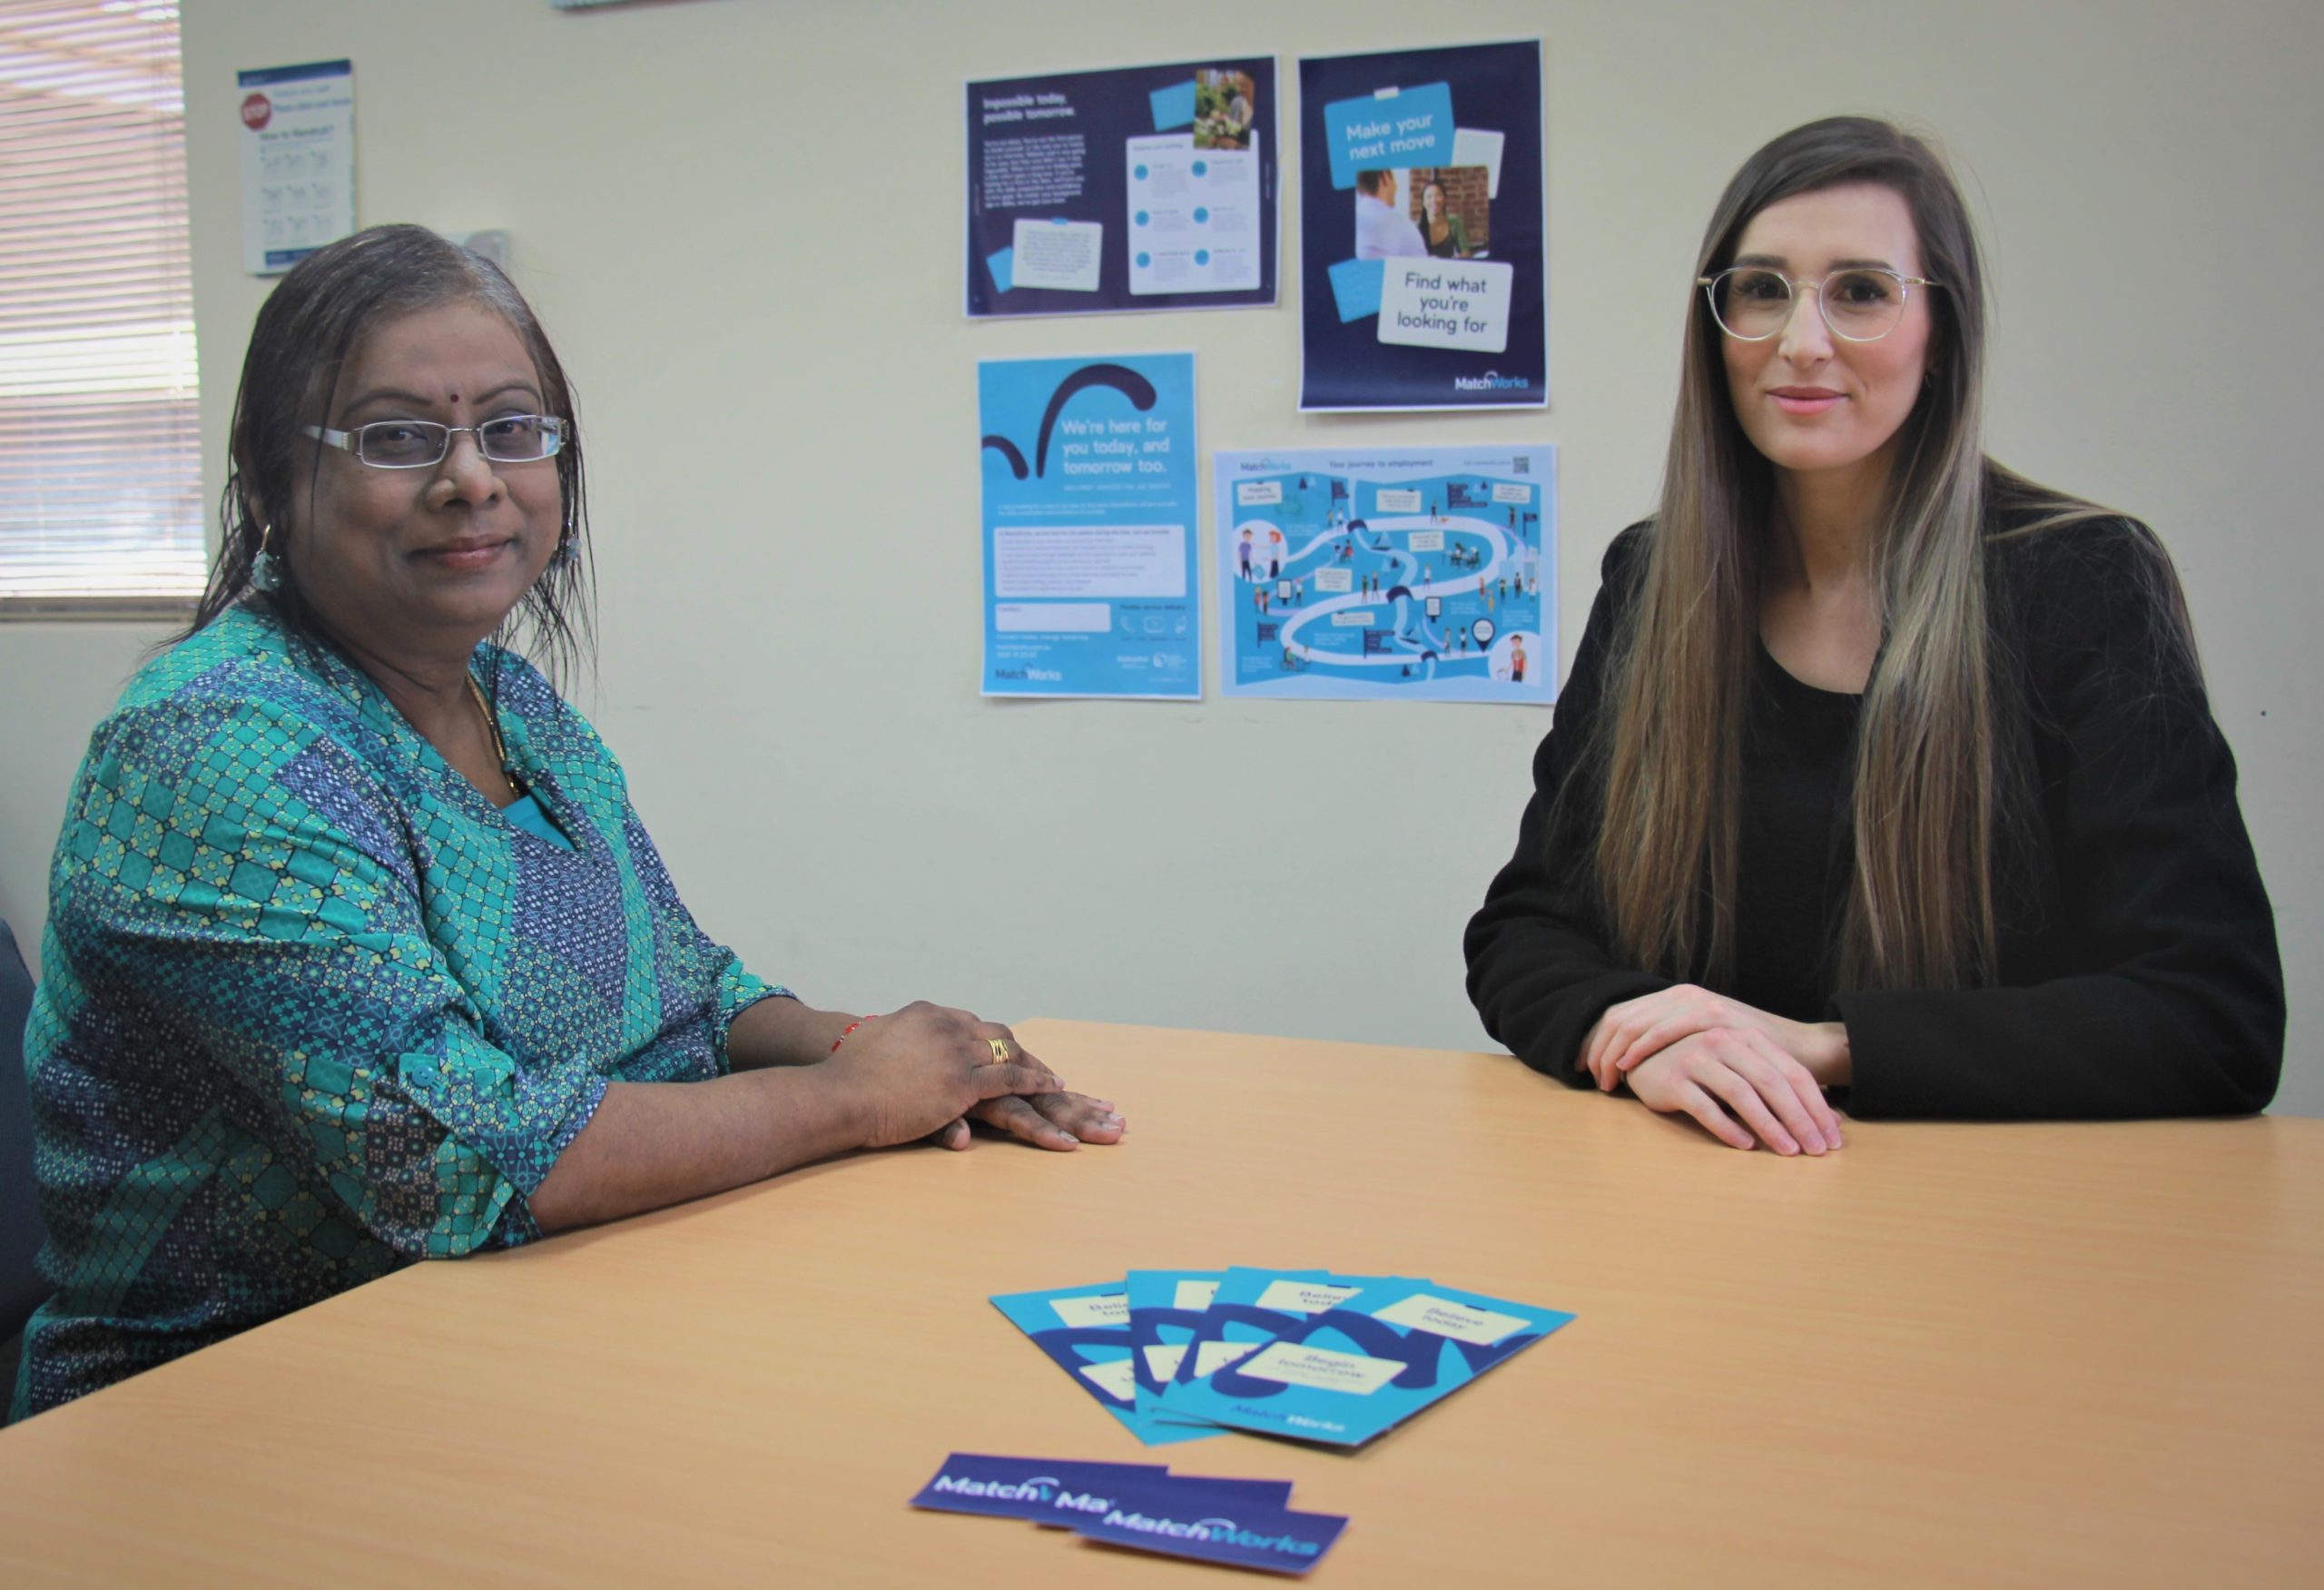 Senior Occupational Therapist, Suma, is part of the Mental Health Clinical Treatment Team who works closely with Employment Consultant Jordan to get people back to work as part of their recovery.